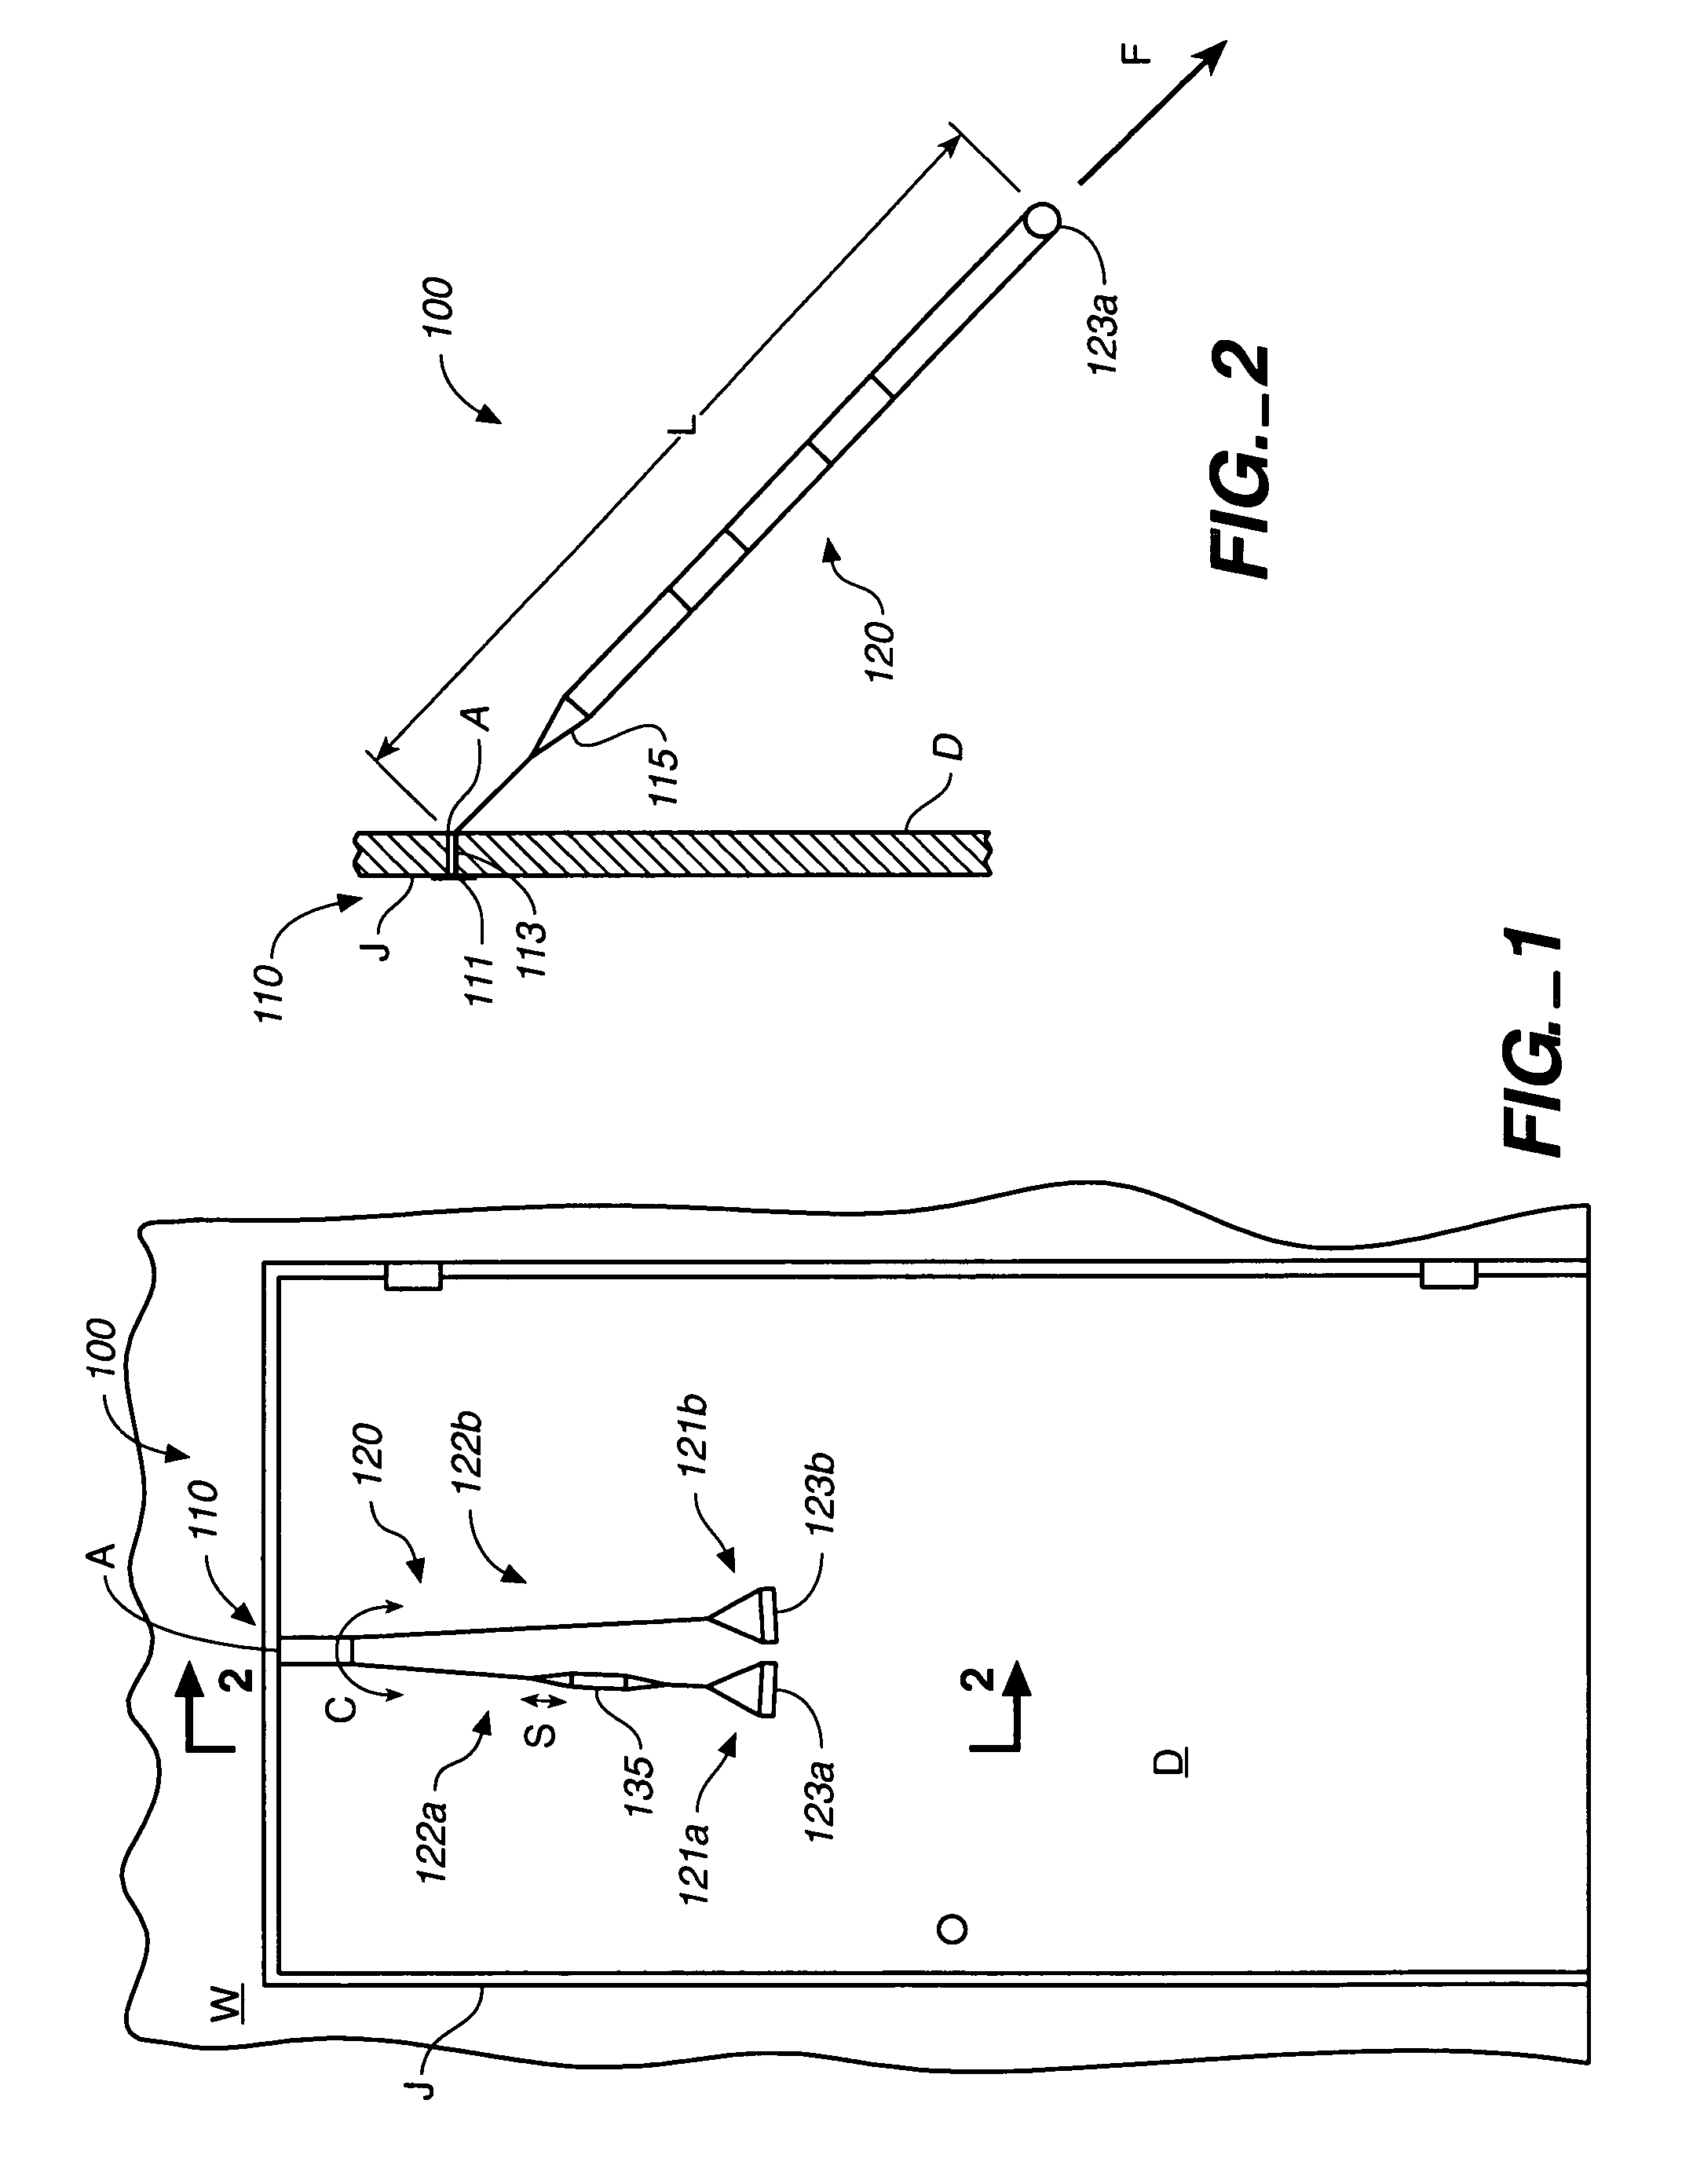 Method of using an adjustable exercise device